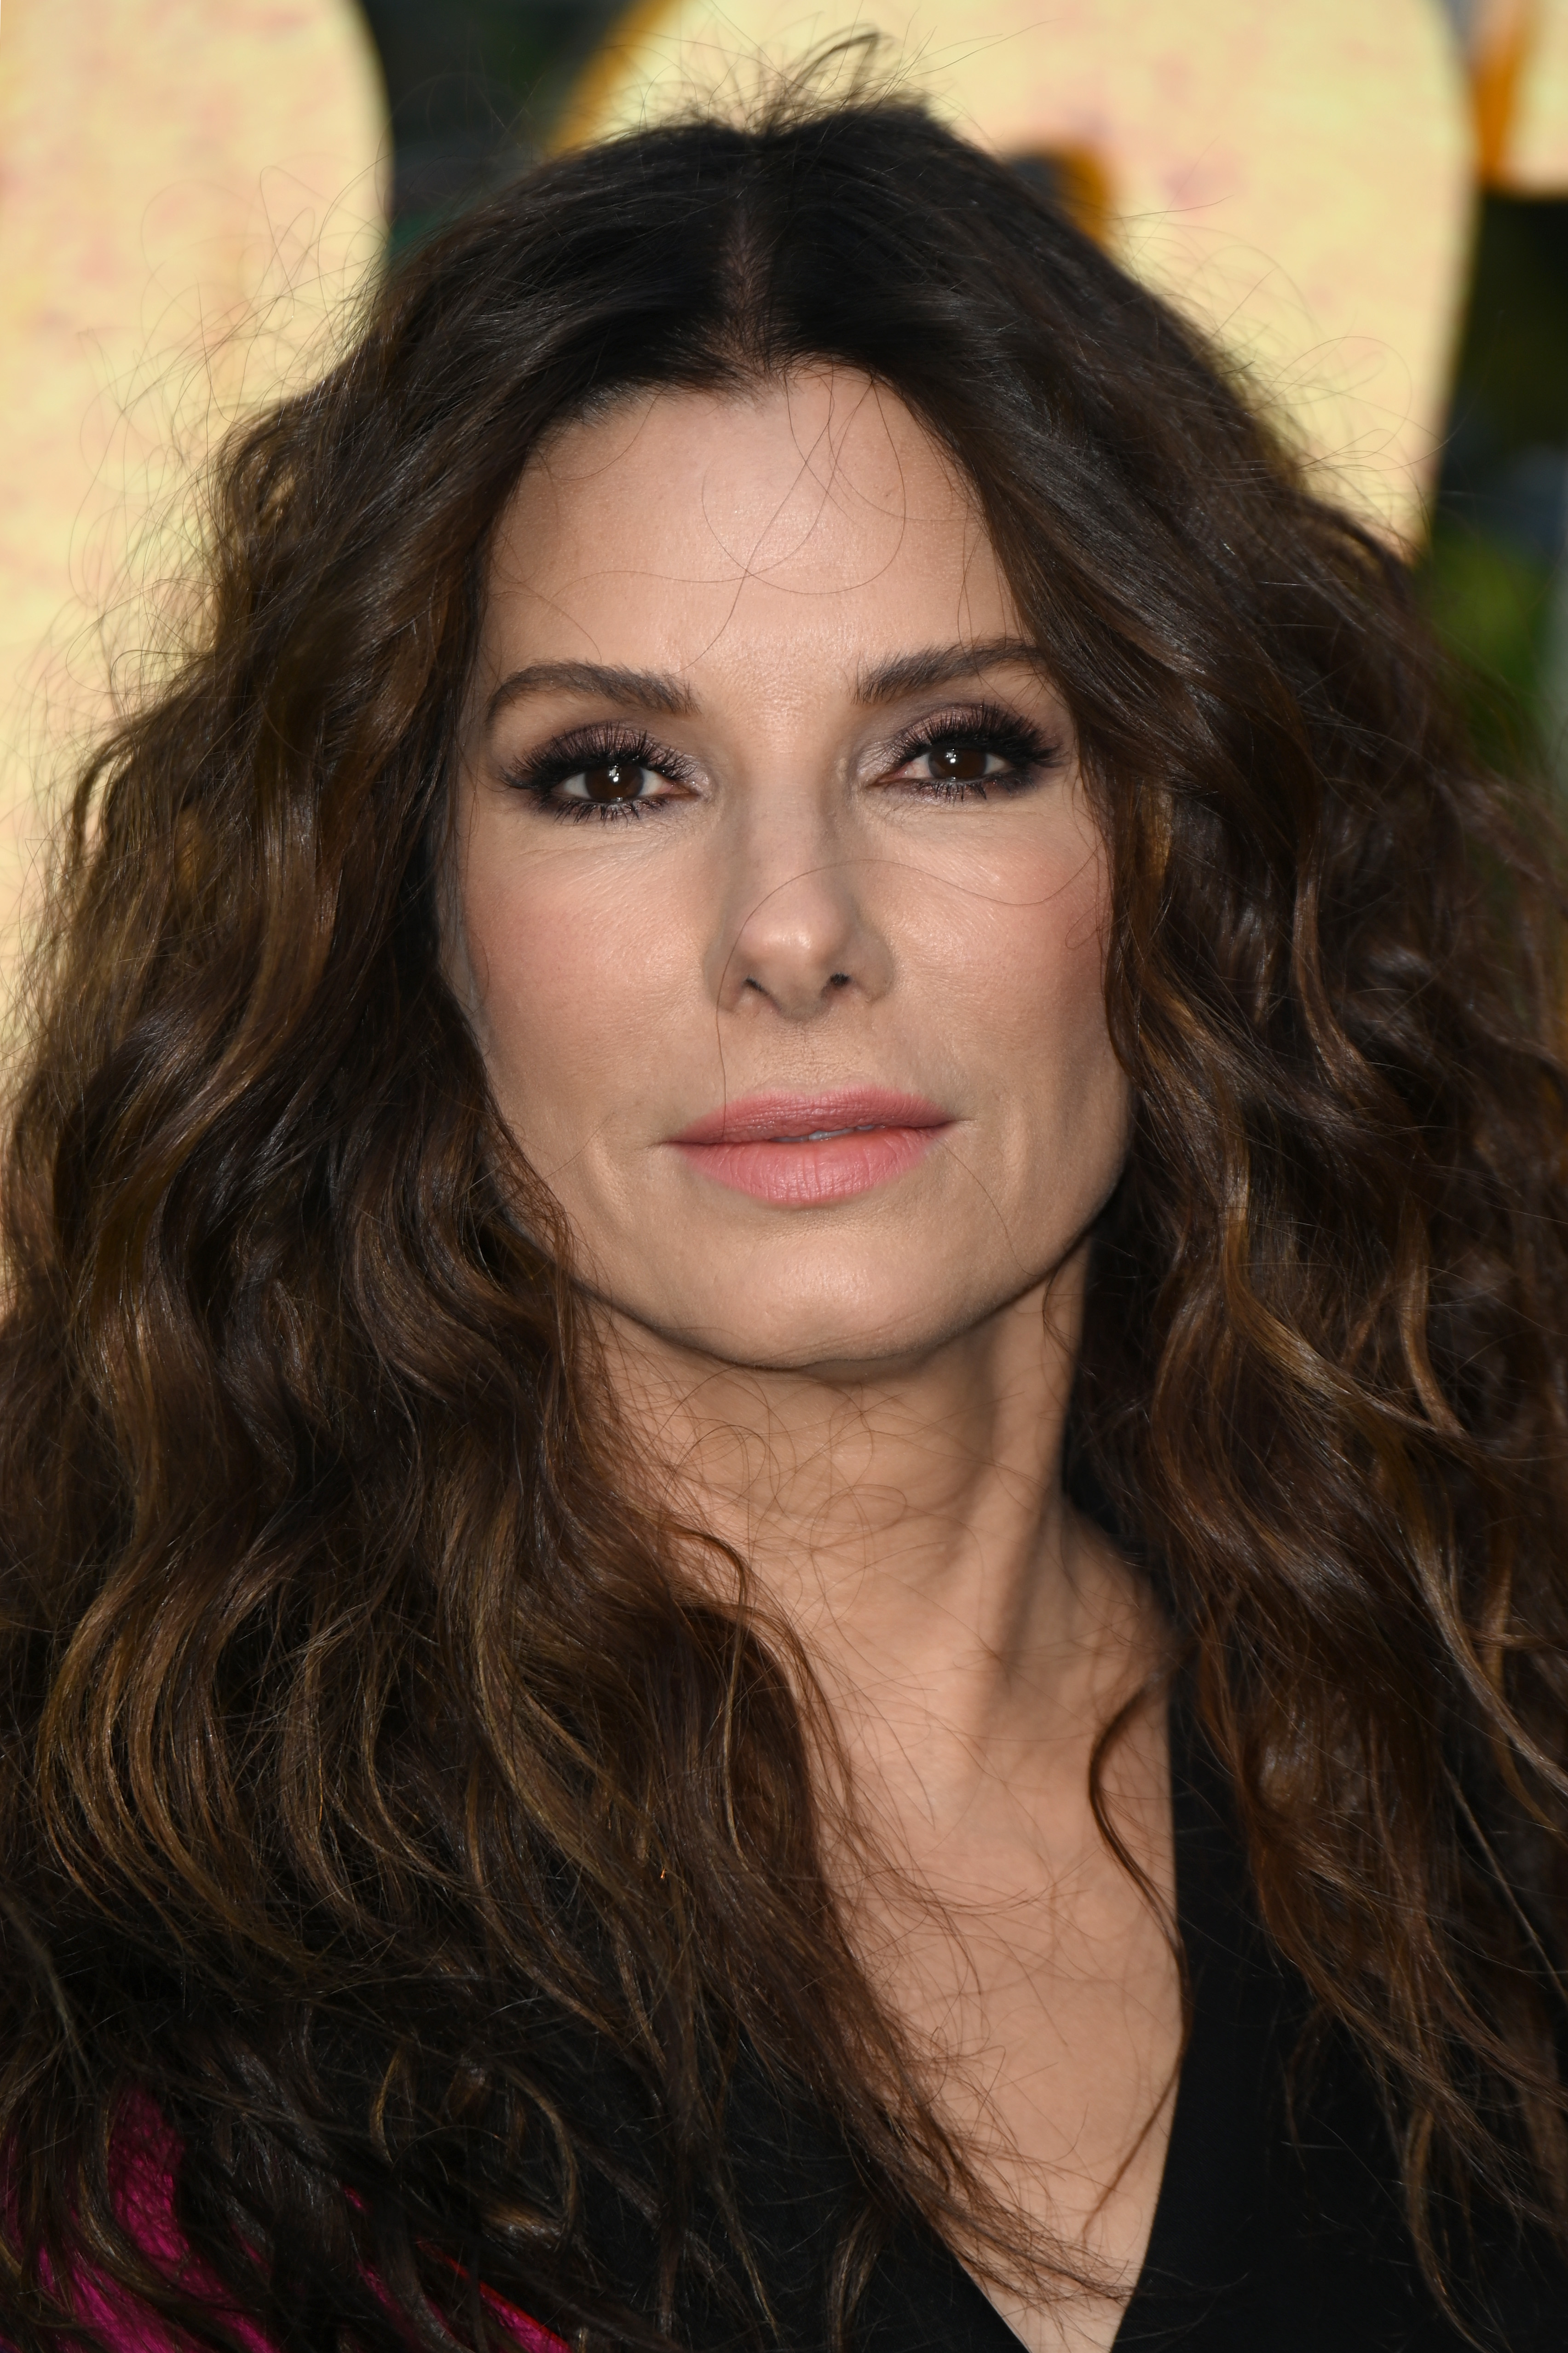 Sandra Bullock at "The Lost City" UK screening on March 31, 2022, in London, England | Source: Getty Images